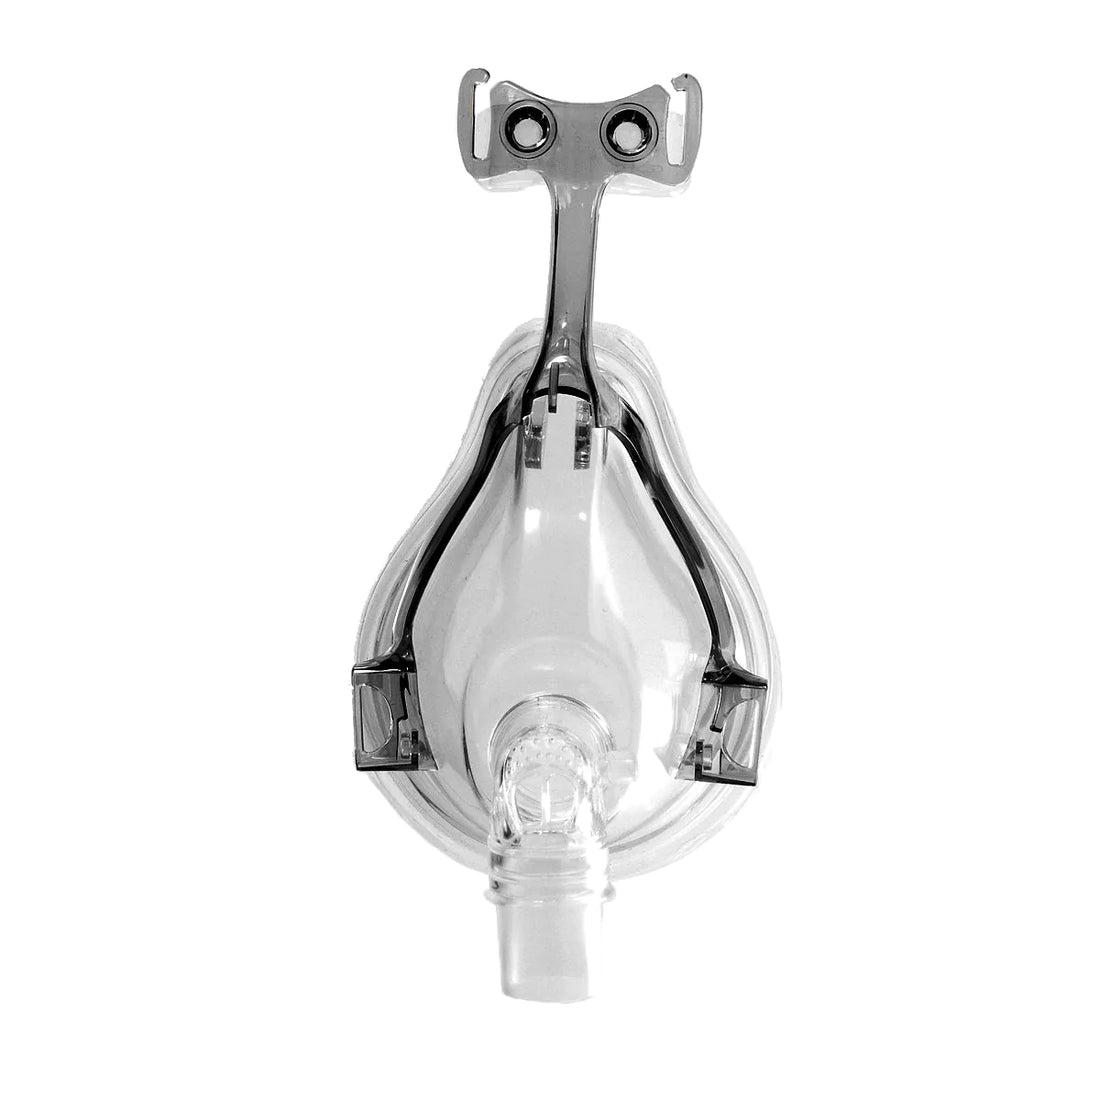 Ecco - Full Face CPAP Mask with Headgear